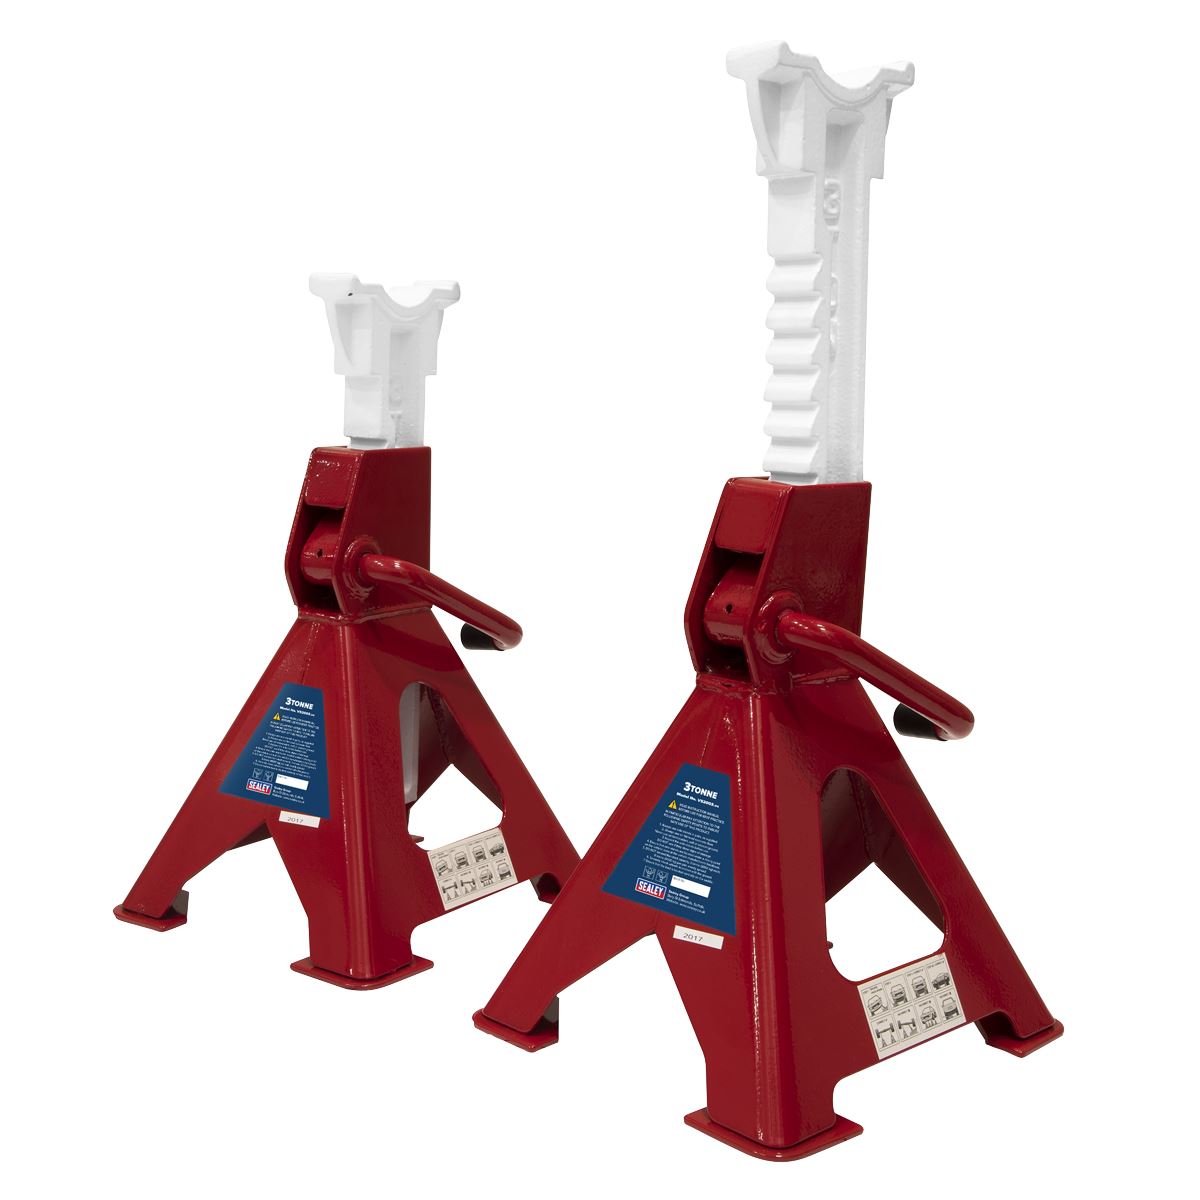 Sealey Ratchet Type Axle Stands (Pair) 3 Tonne Capacity per Stand